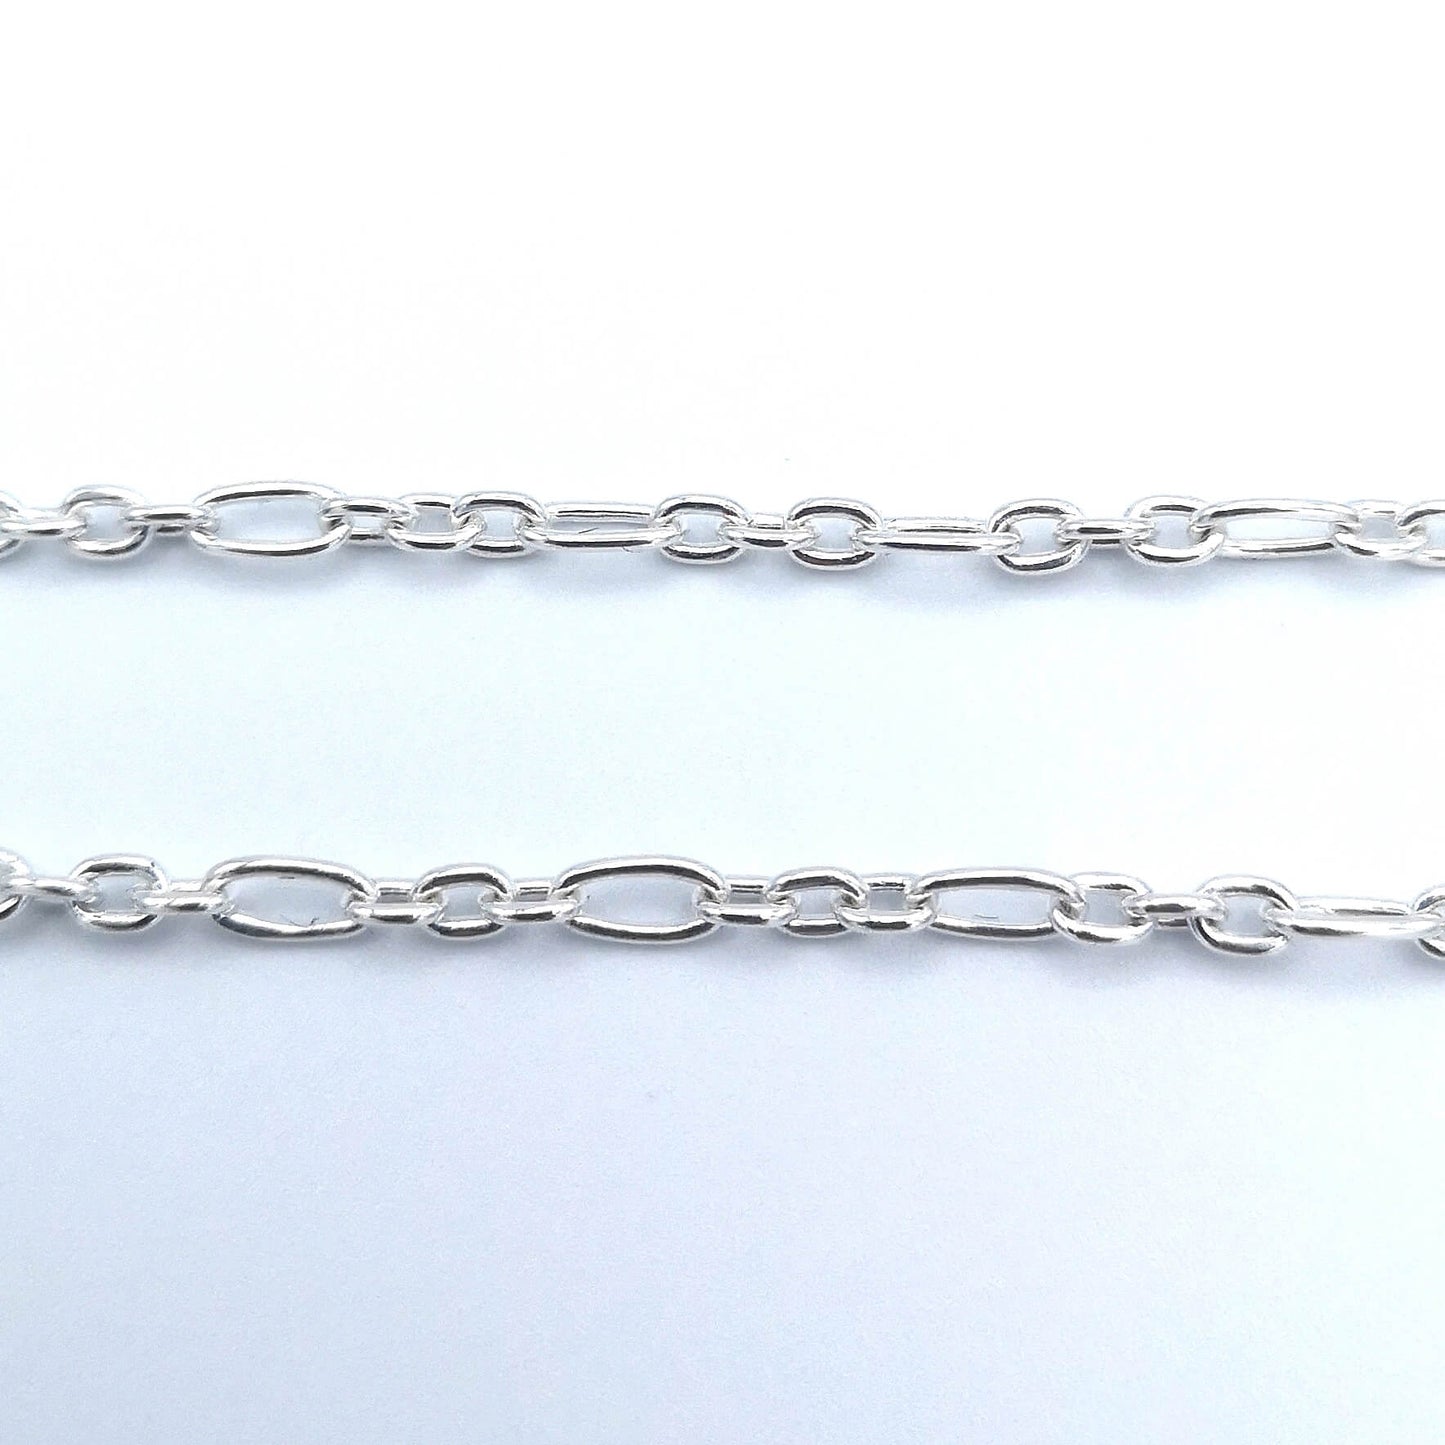 26" Sterling Silver 3mm Cable Figaro Chain